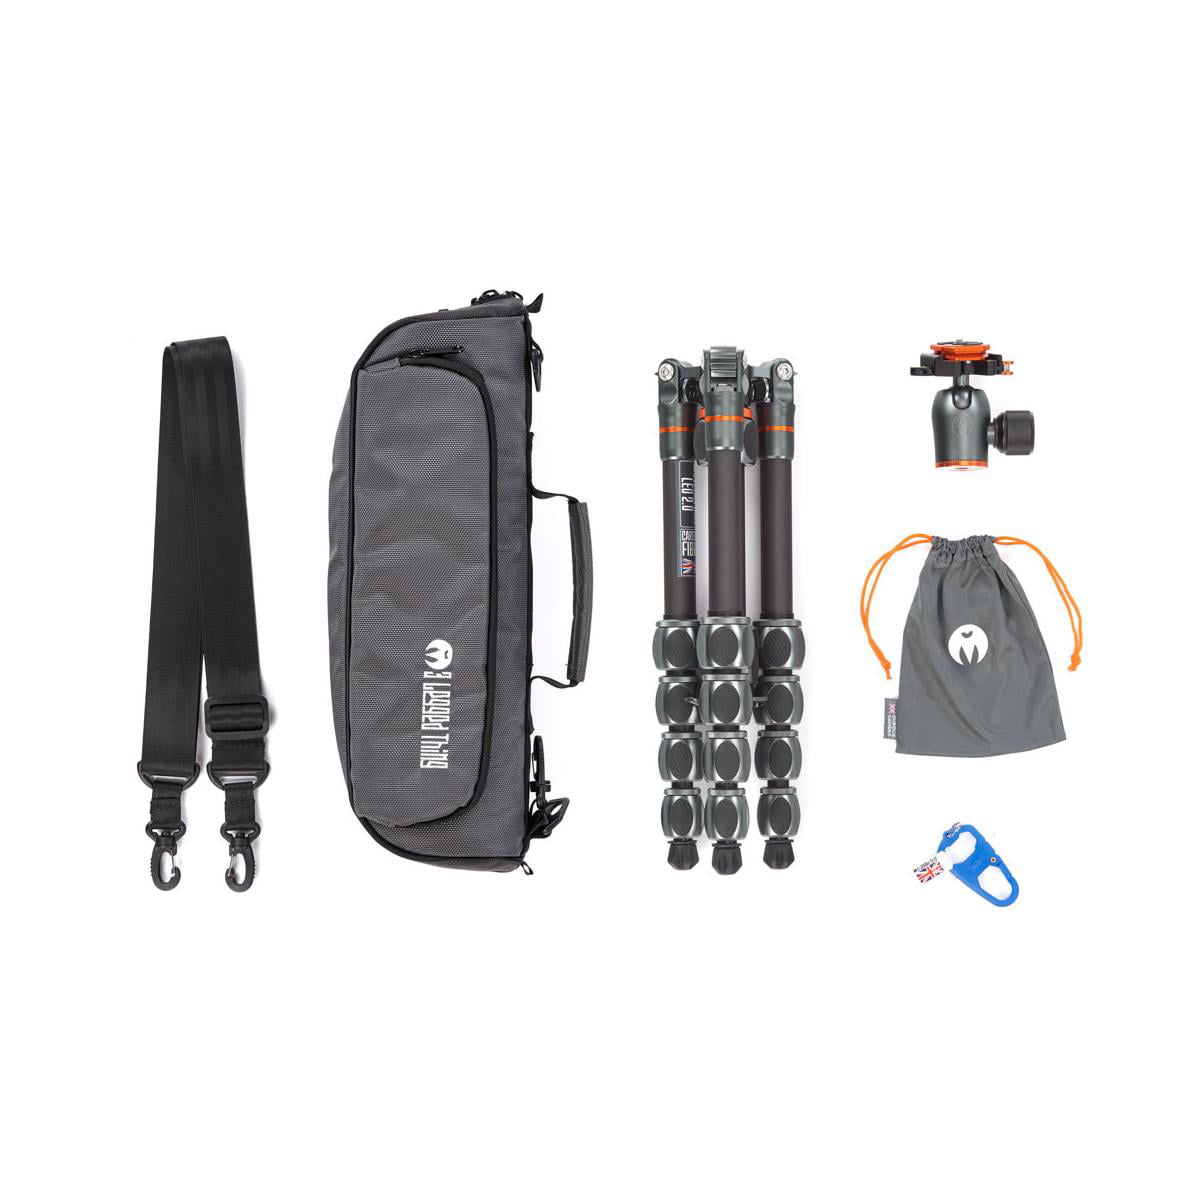 3 Legged Thing LEO 2.0 Carbon Fibre Tripod System with AirHed Pro Lever ballhead Grey